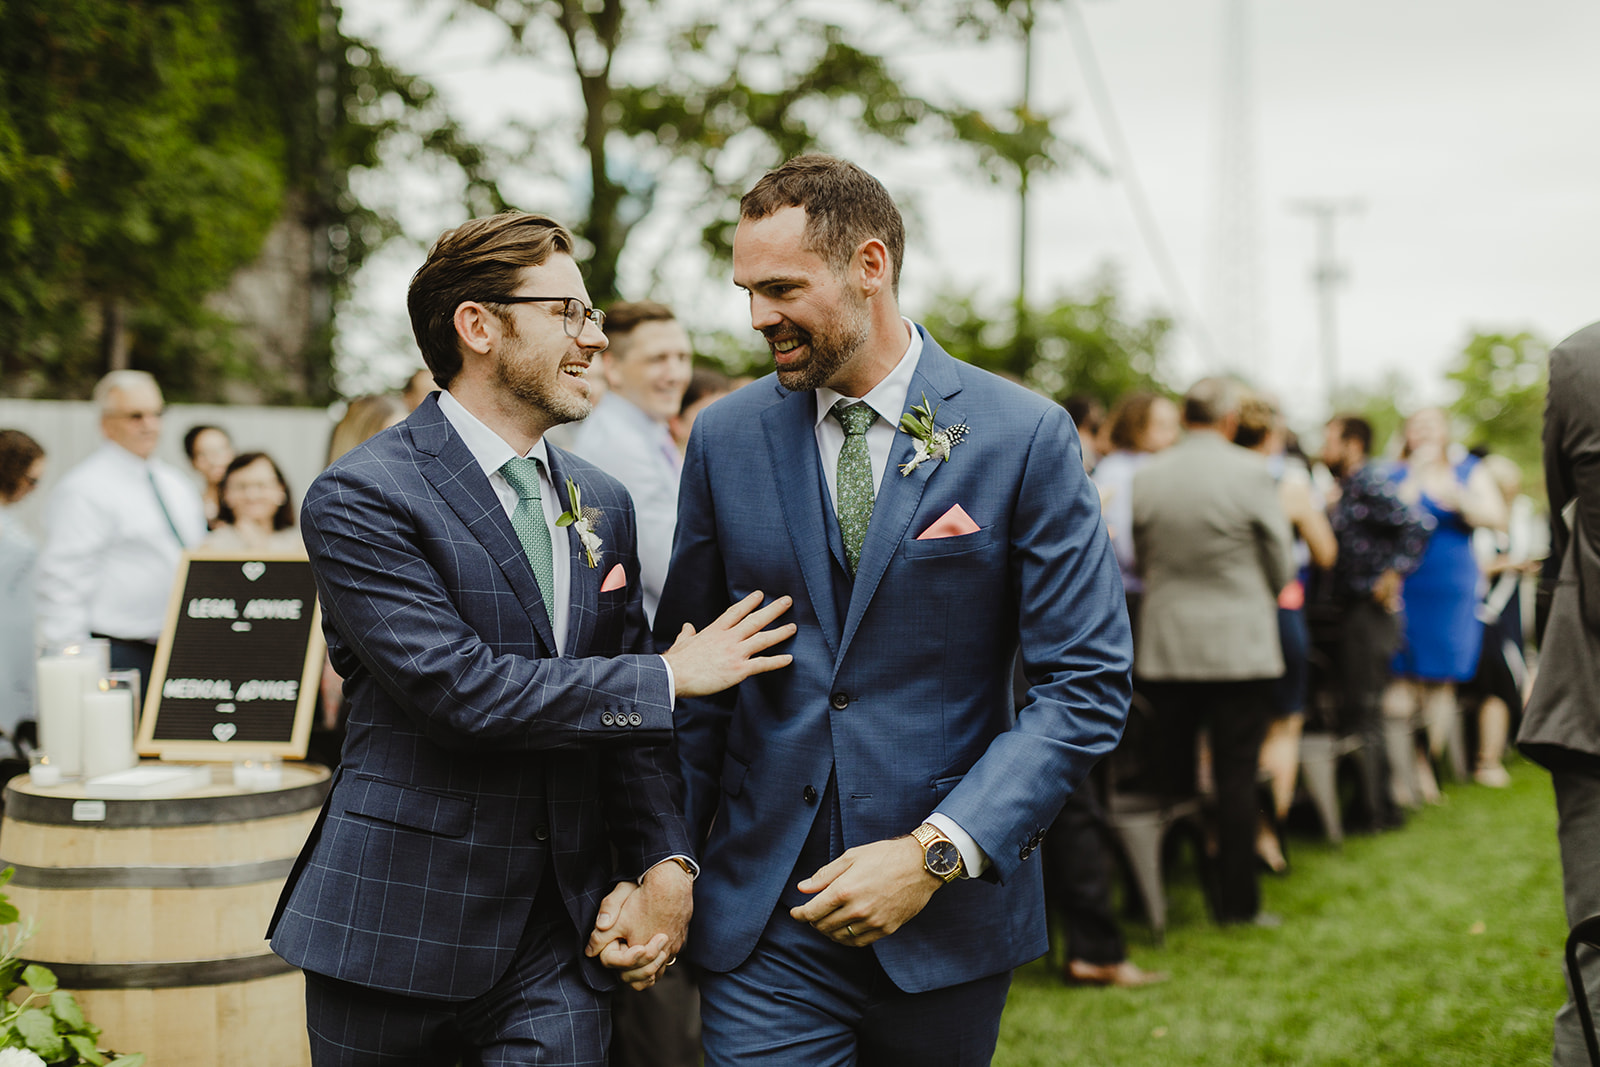 Grooms celebrating after their wedding ceremony